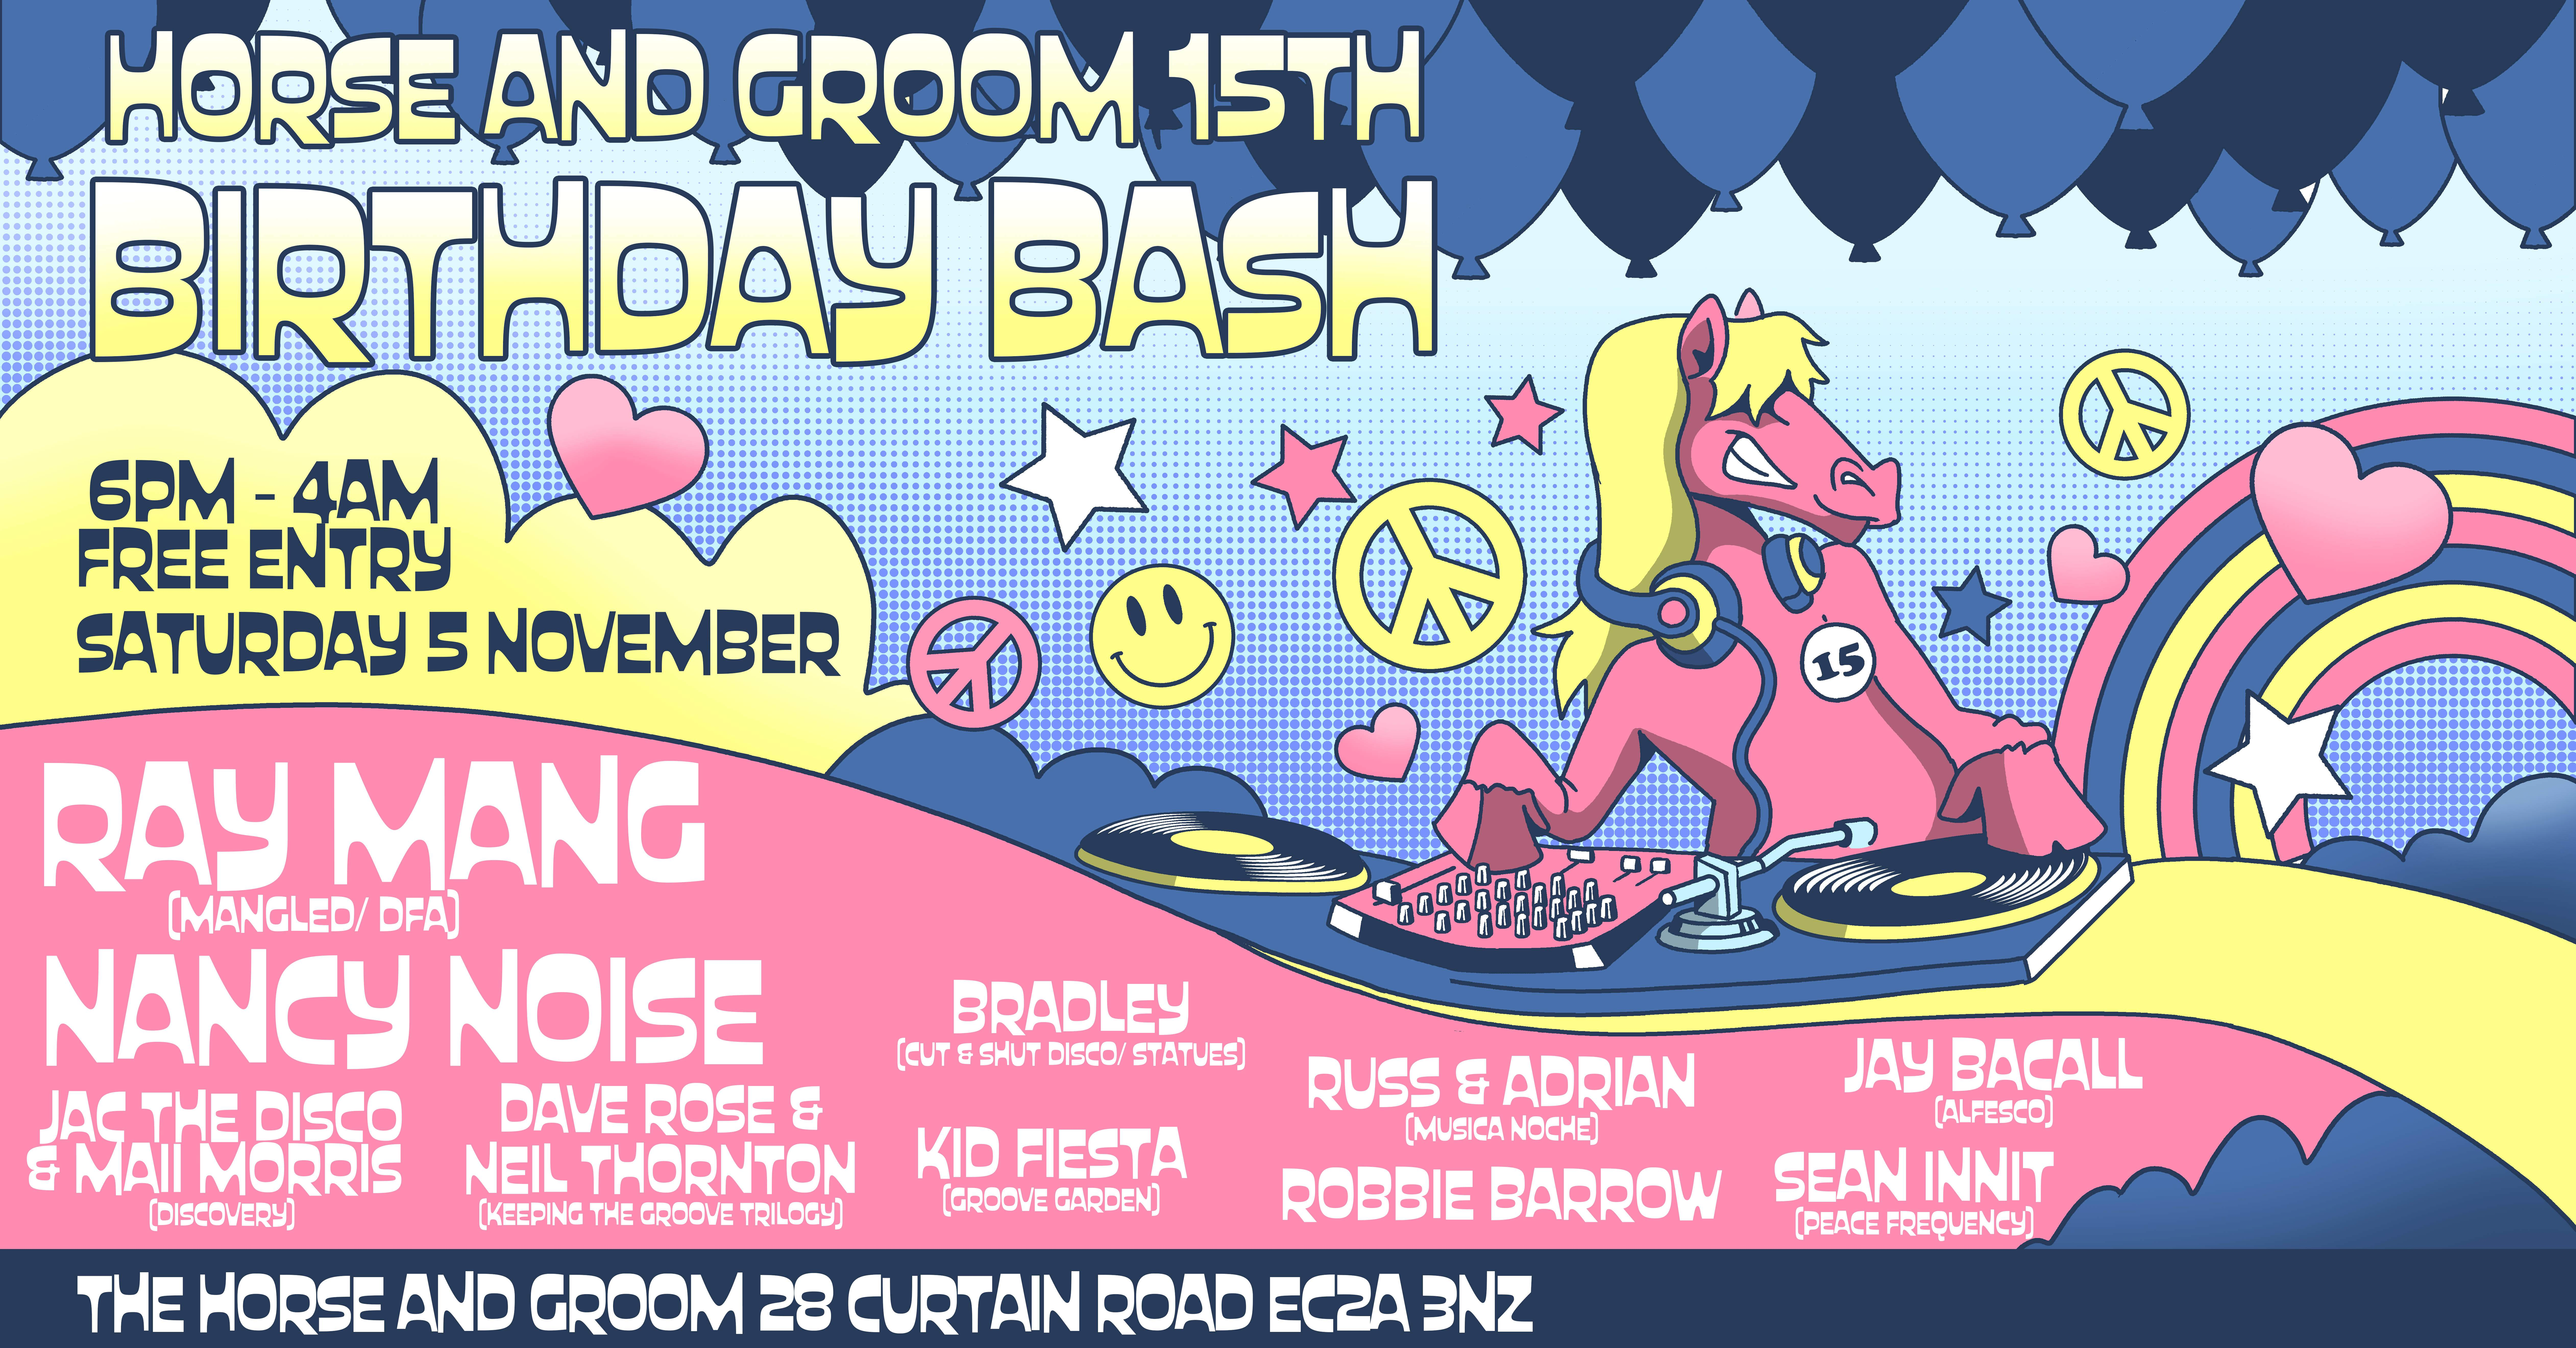 Horse and Groom's 15th free birthday bash w/ Ray Mang & Nancy Noise  - Página frontal